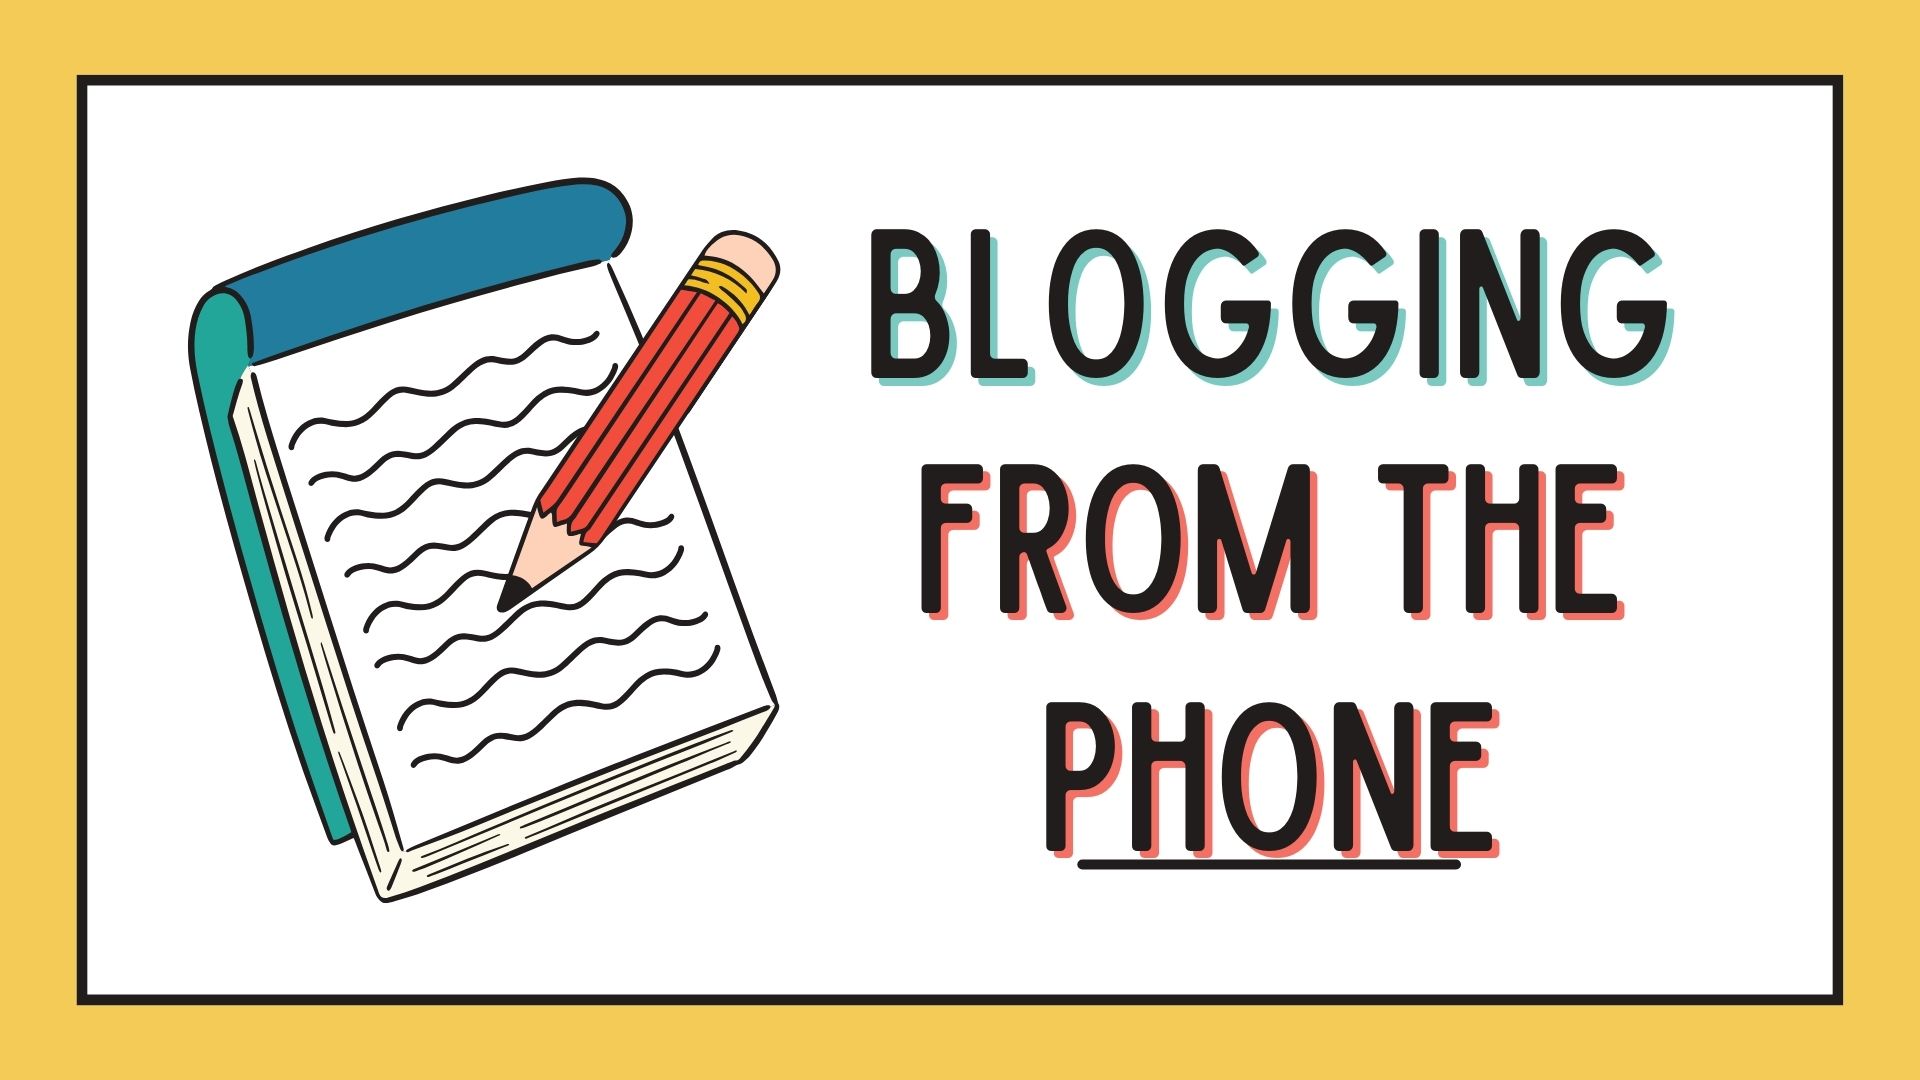 Blogging from the phone